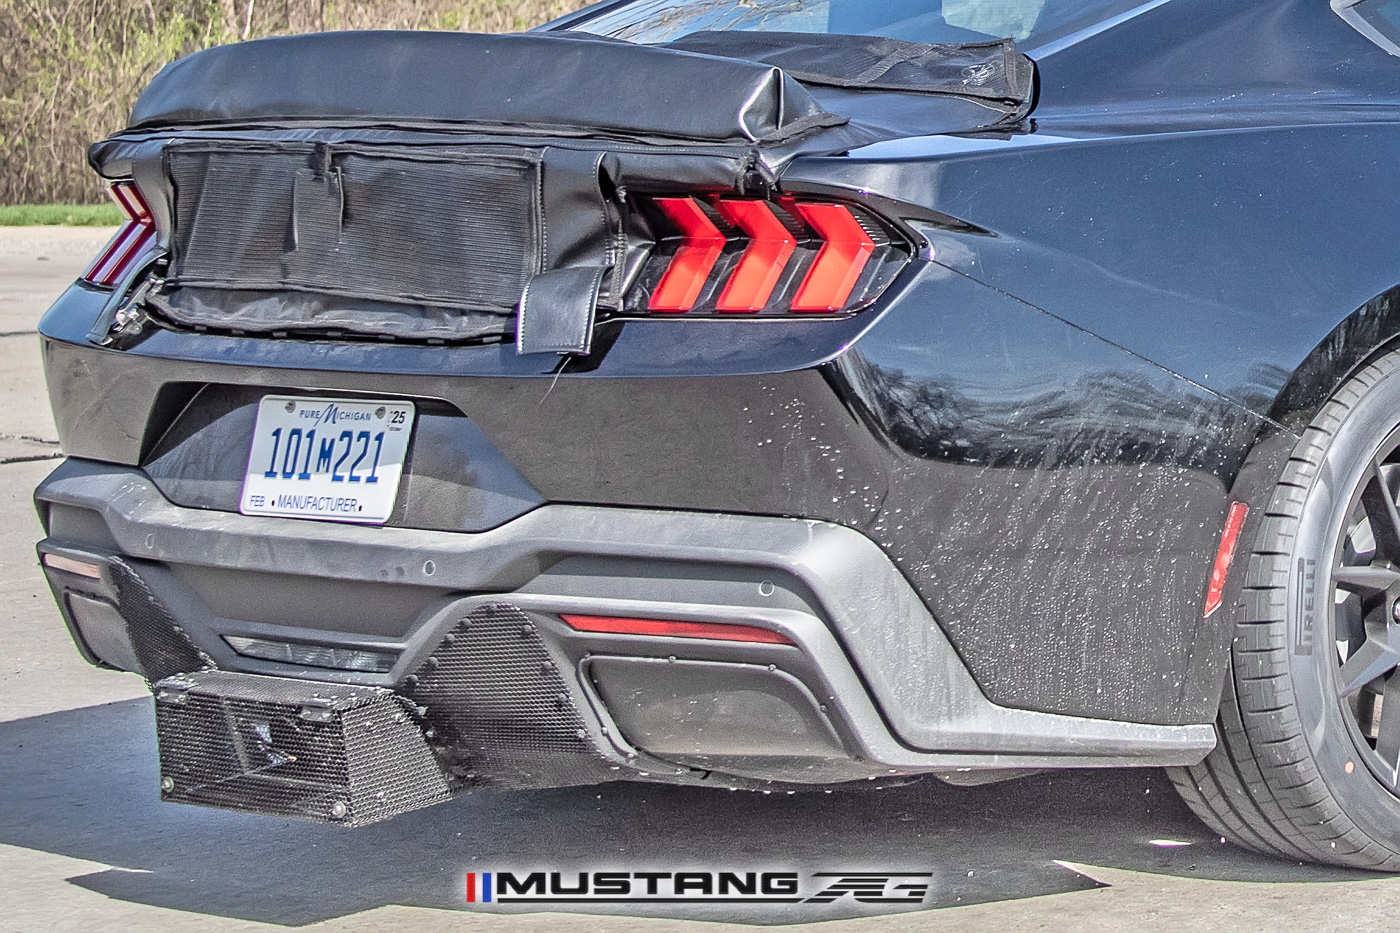 S650 Mustang 📸 Mustang GT3 Road-Version Prototype Spied Testing with Center-Exit Exhaust s650-mustang-variant-prototype-center-exit-exhaust-11